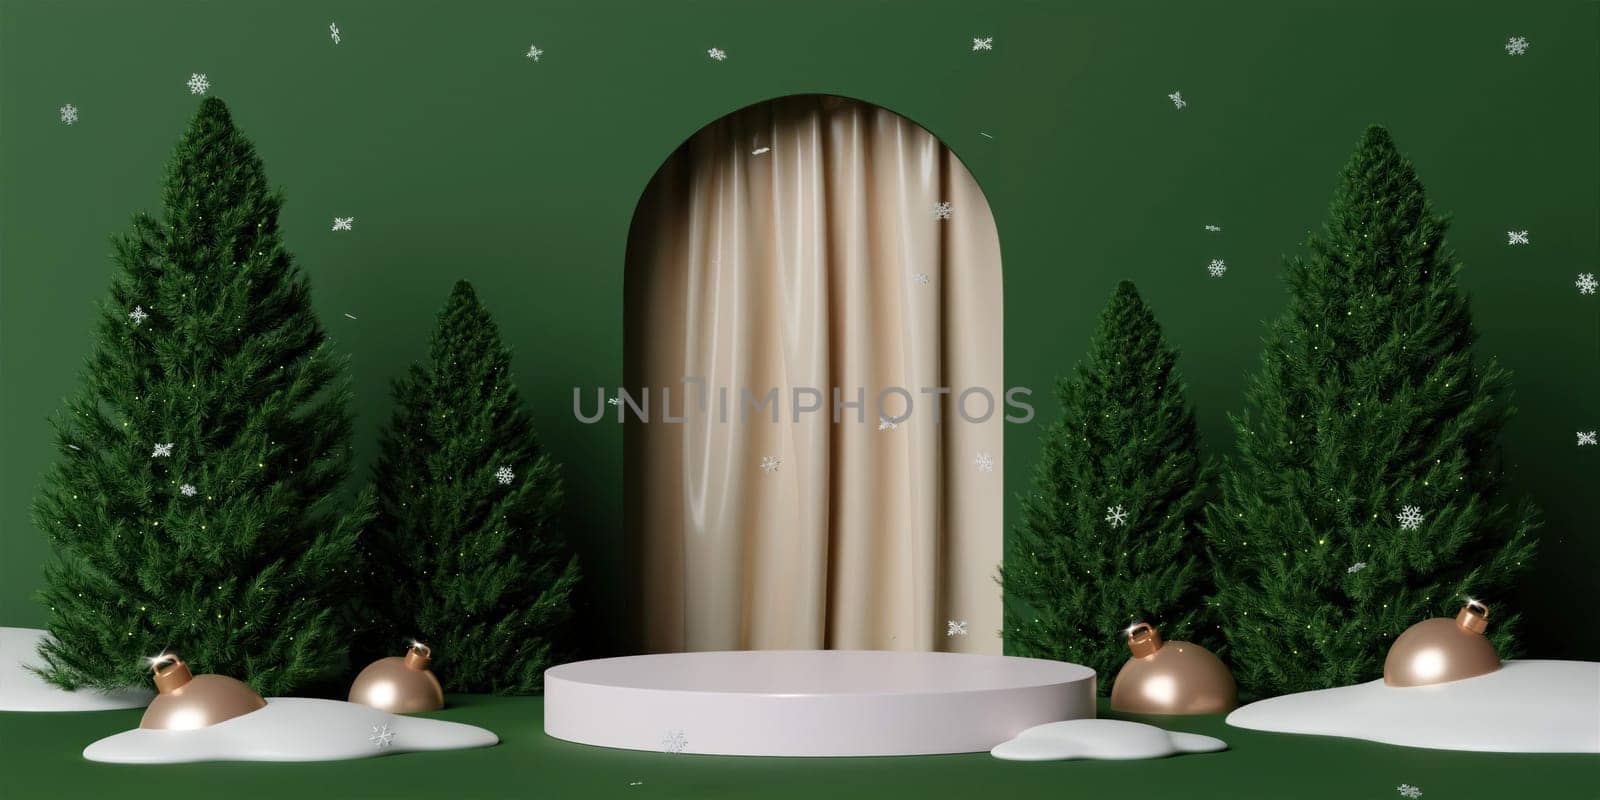 3d Christmas tree podium. Realistic 3d with design stage podium. Decorative festive elements glass bauble balls. Xmas holiday template podium..